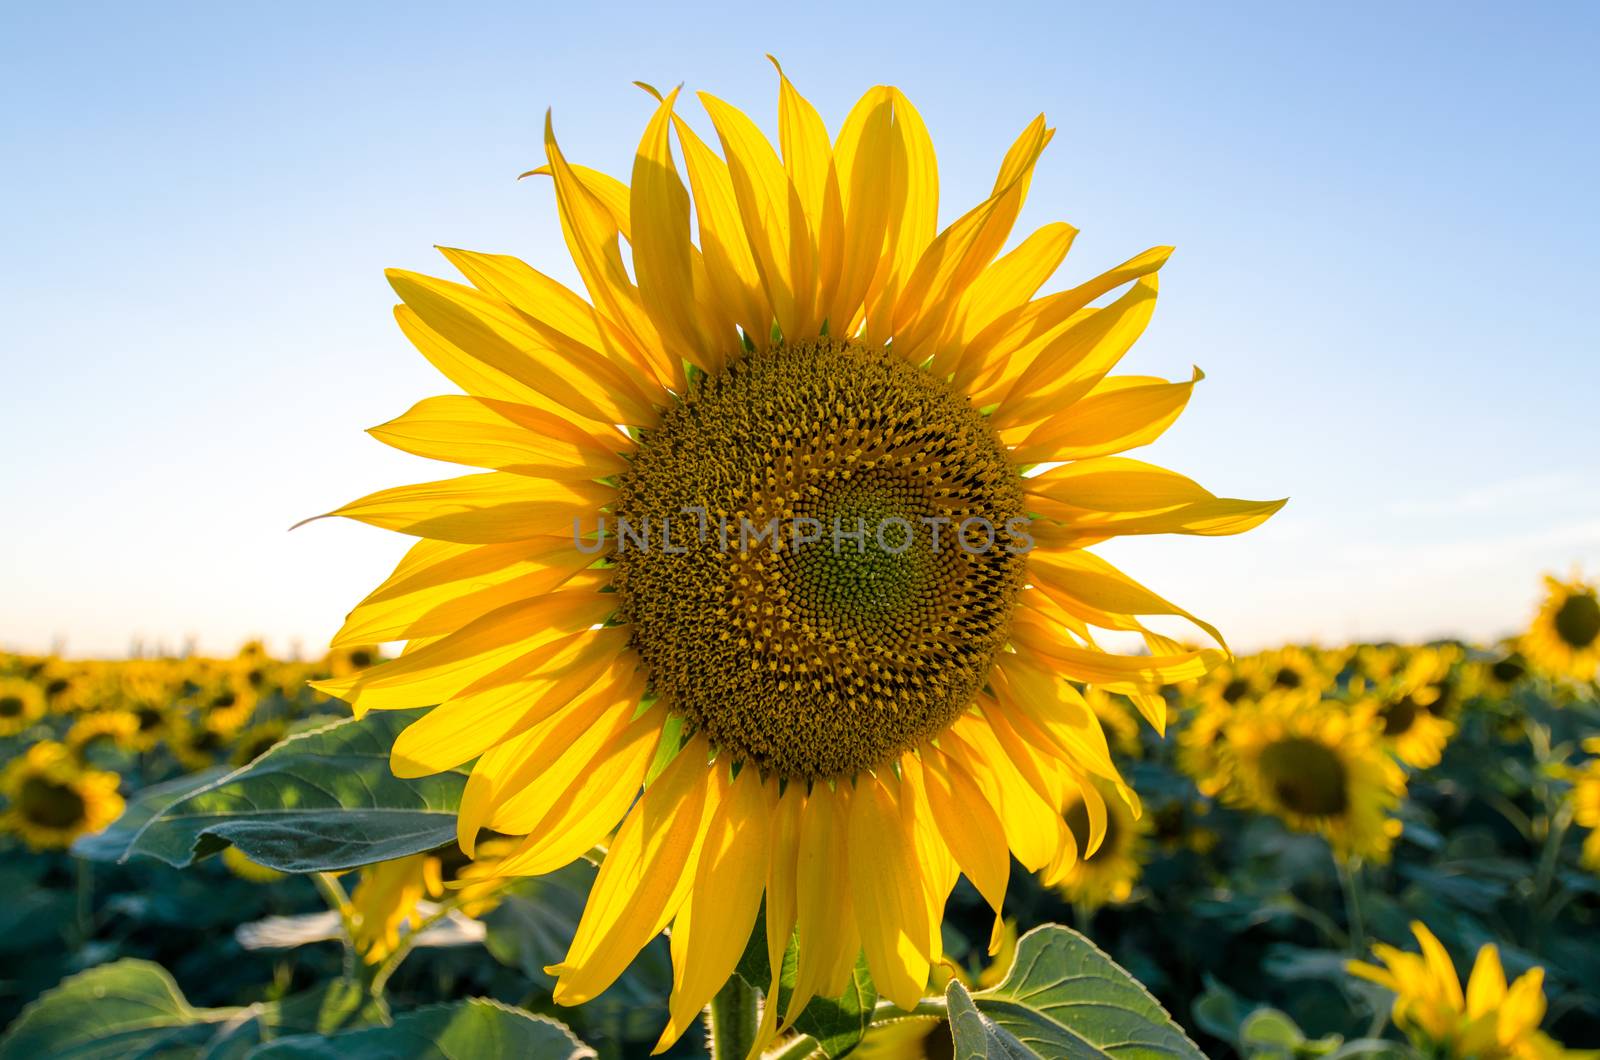 ripe sunflower with yellow leaves close up by Gera8th